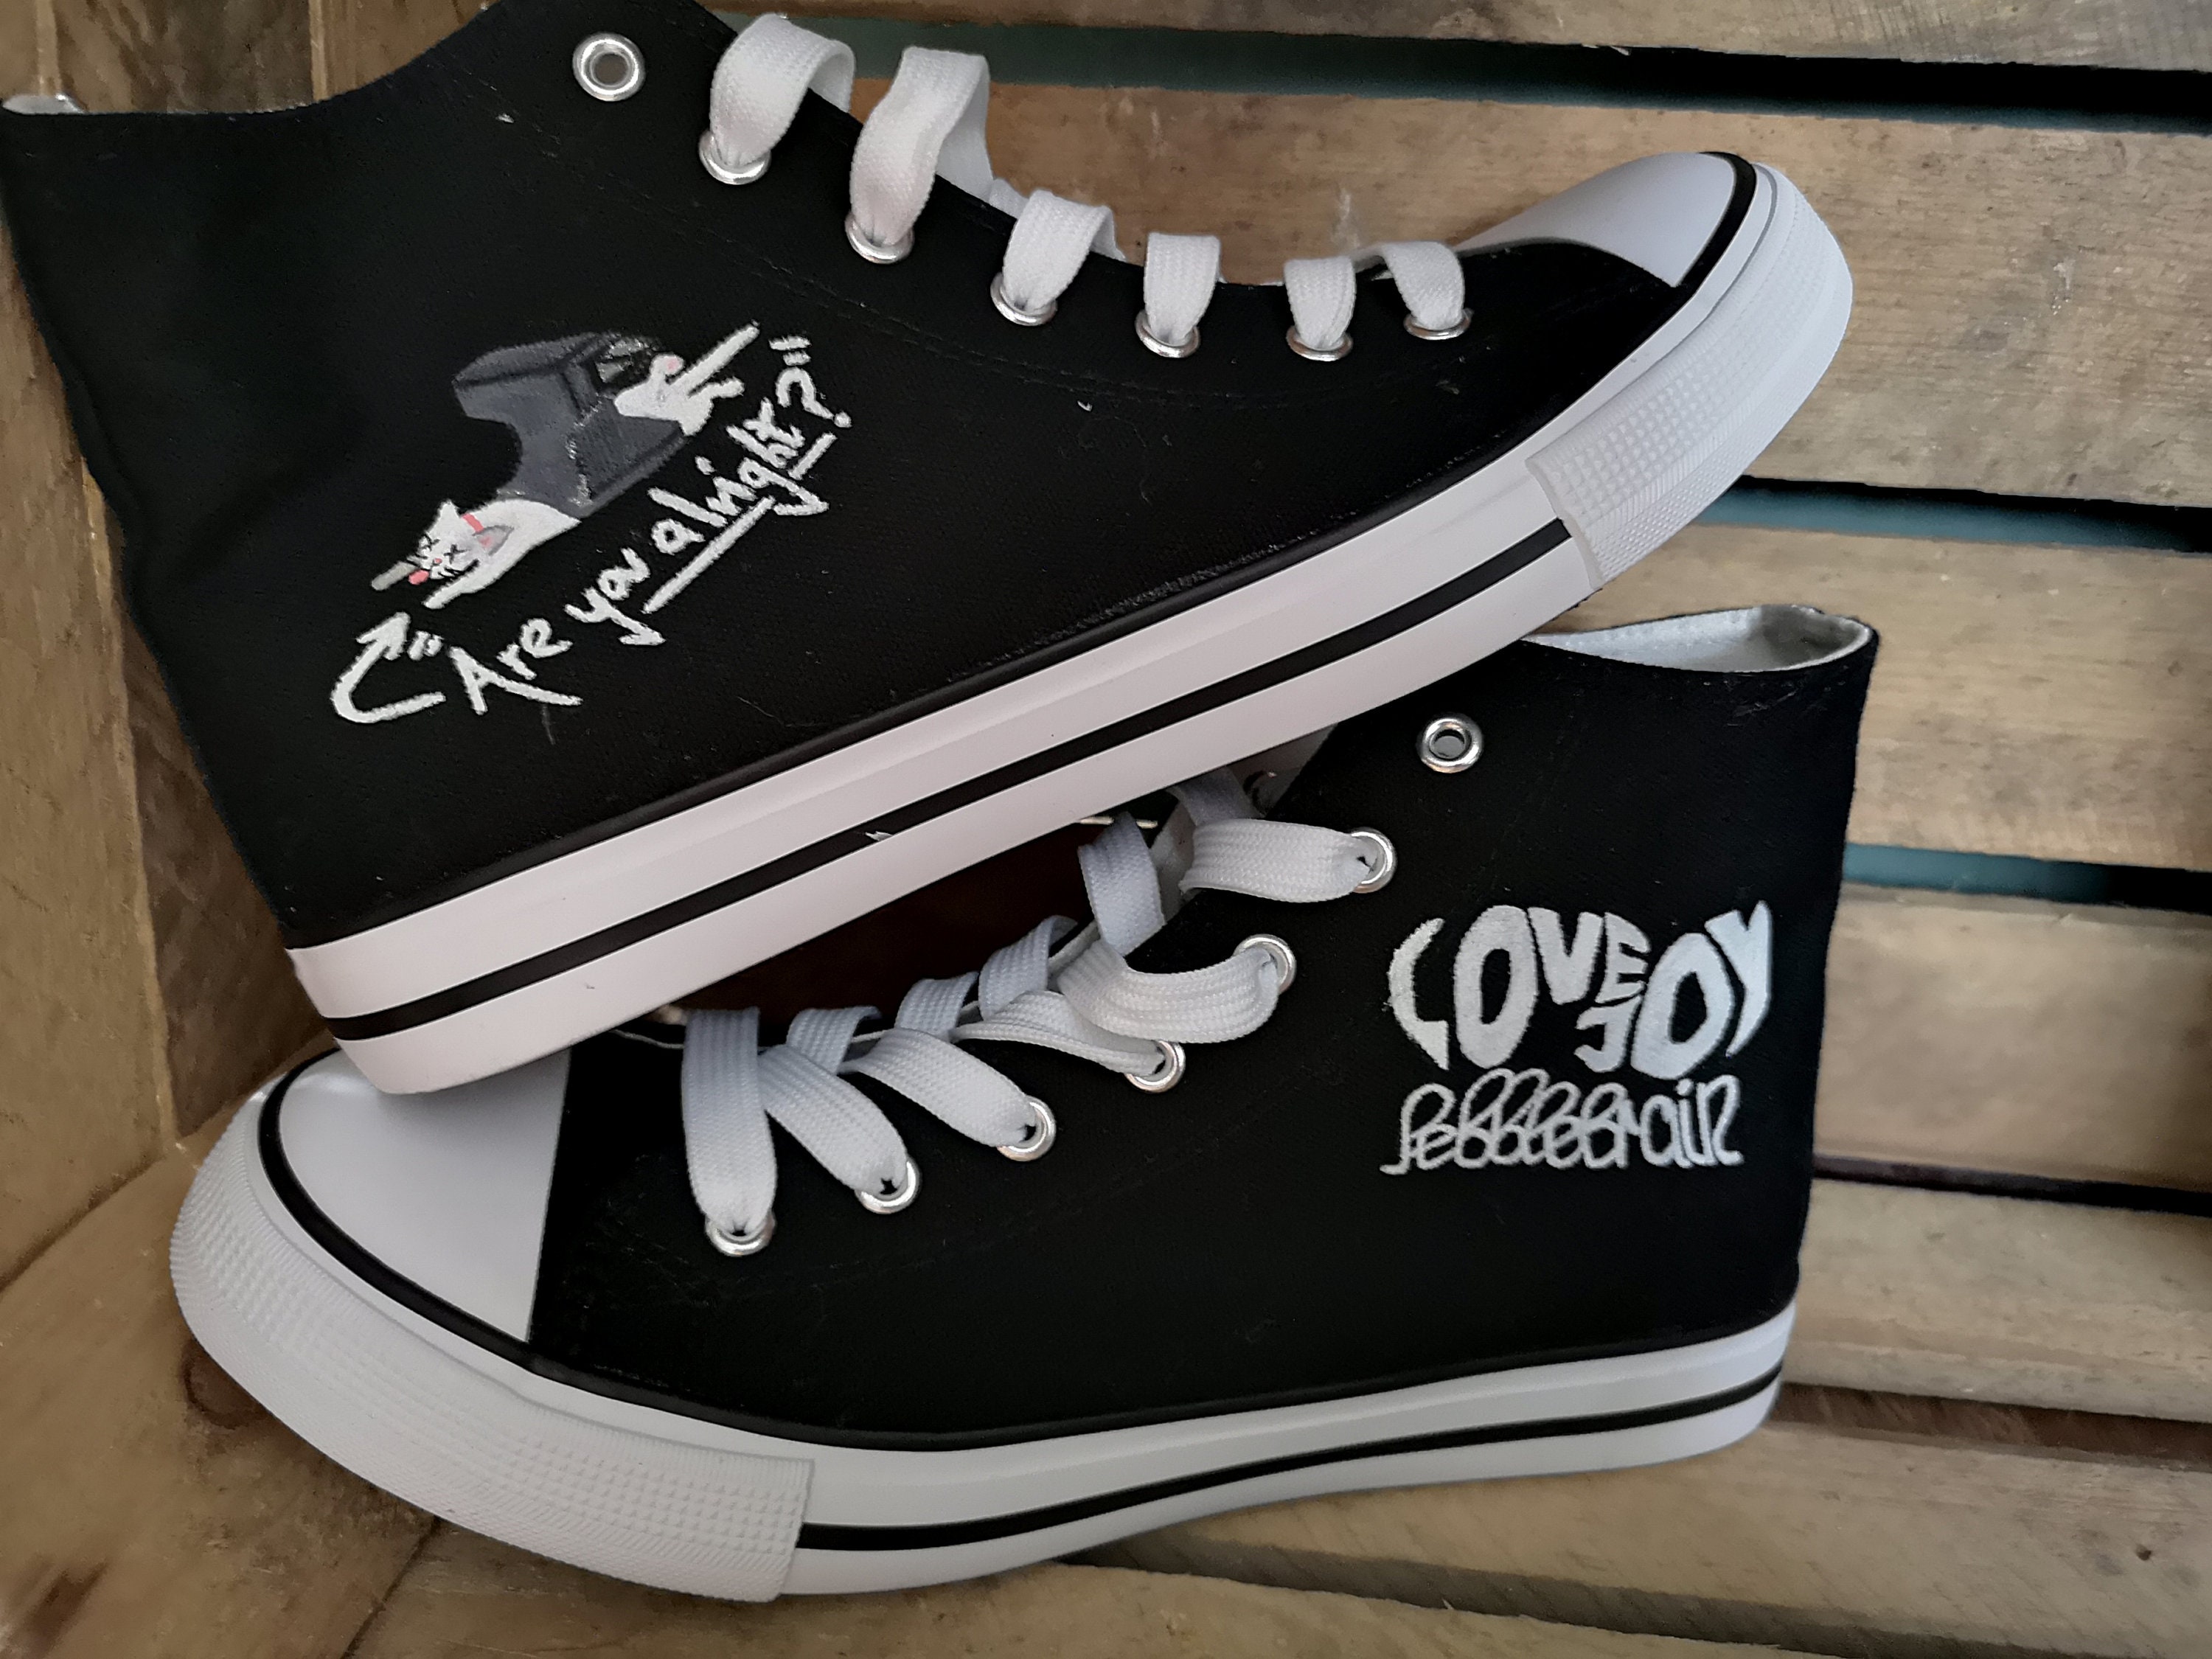 Sneakers Lovejoy Merch Indierock no Name Converse All Star Customed Ruß  Kiesel Gehirn Are You Alright Band Wilbur Soot Dsmp - Etsy